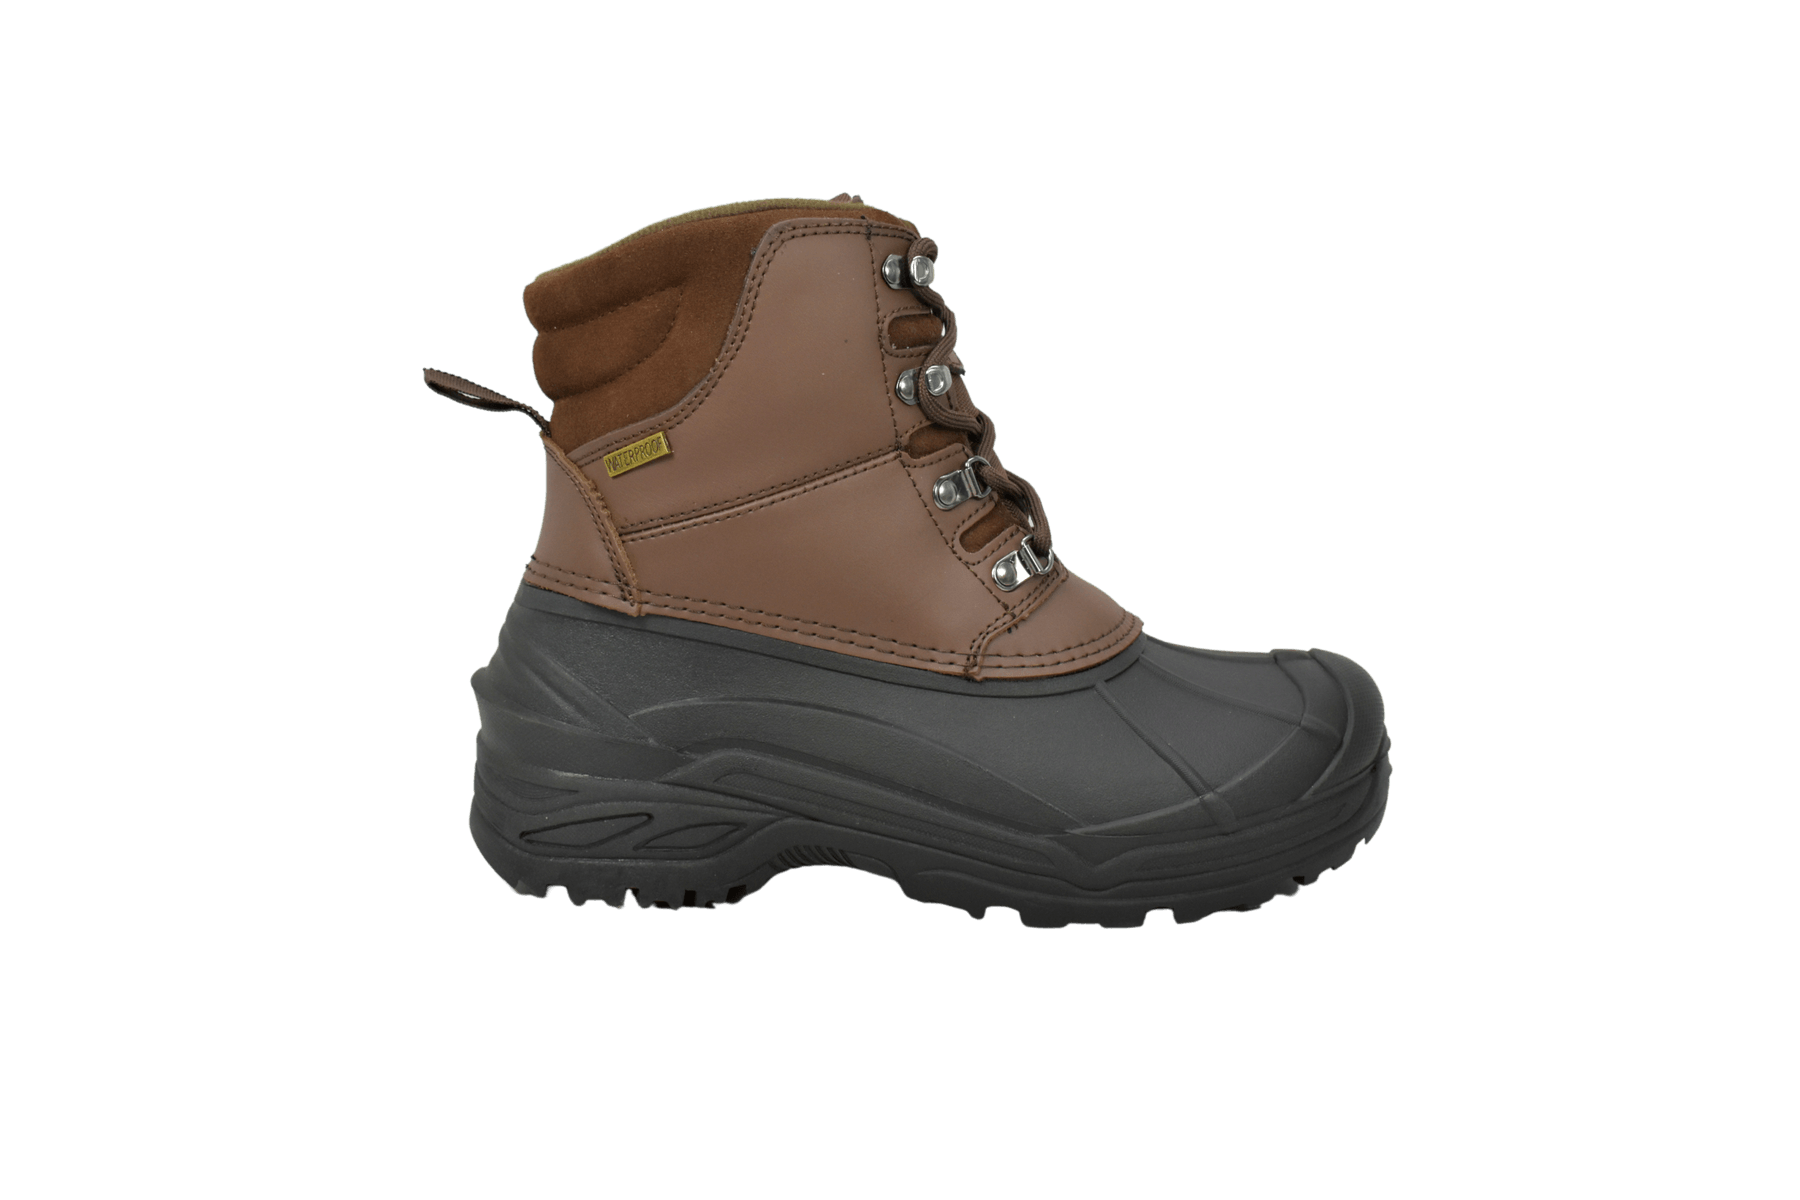 Northikee Men's Winter Boots Brown - Flyclothing LLC